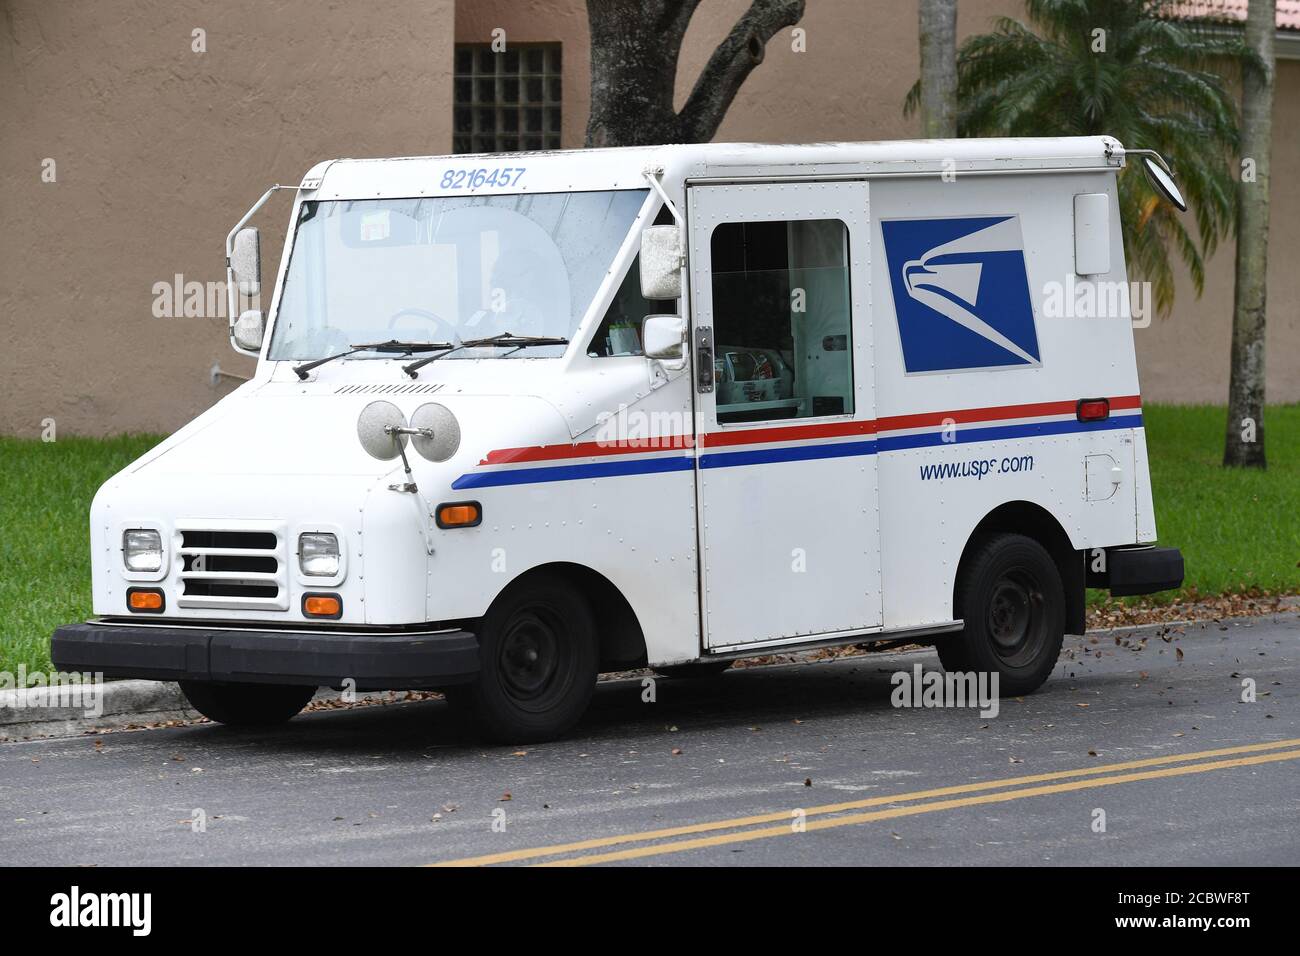 Pompano Beach, FL, USA. 15th Aug, 2020. The US Postal Service (USPS) has warned that millions of mail-in votes may not arrive in time to be counted on the presidential election day, 3 November, But on Thursday, Mr Trump said he was blocking additional funding for the USPS to help with election issues, because he opposed mail-in voting on August 15, 2020 in Pompano Beach, Florida. Credit: Mpi04/Media Punch/Alamy Live News Stock Photo